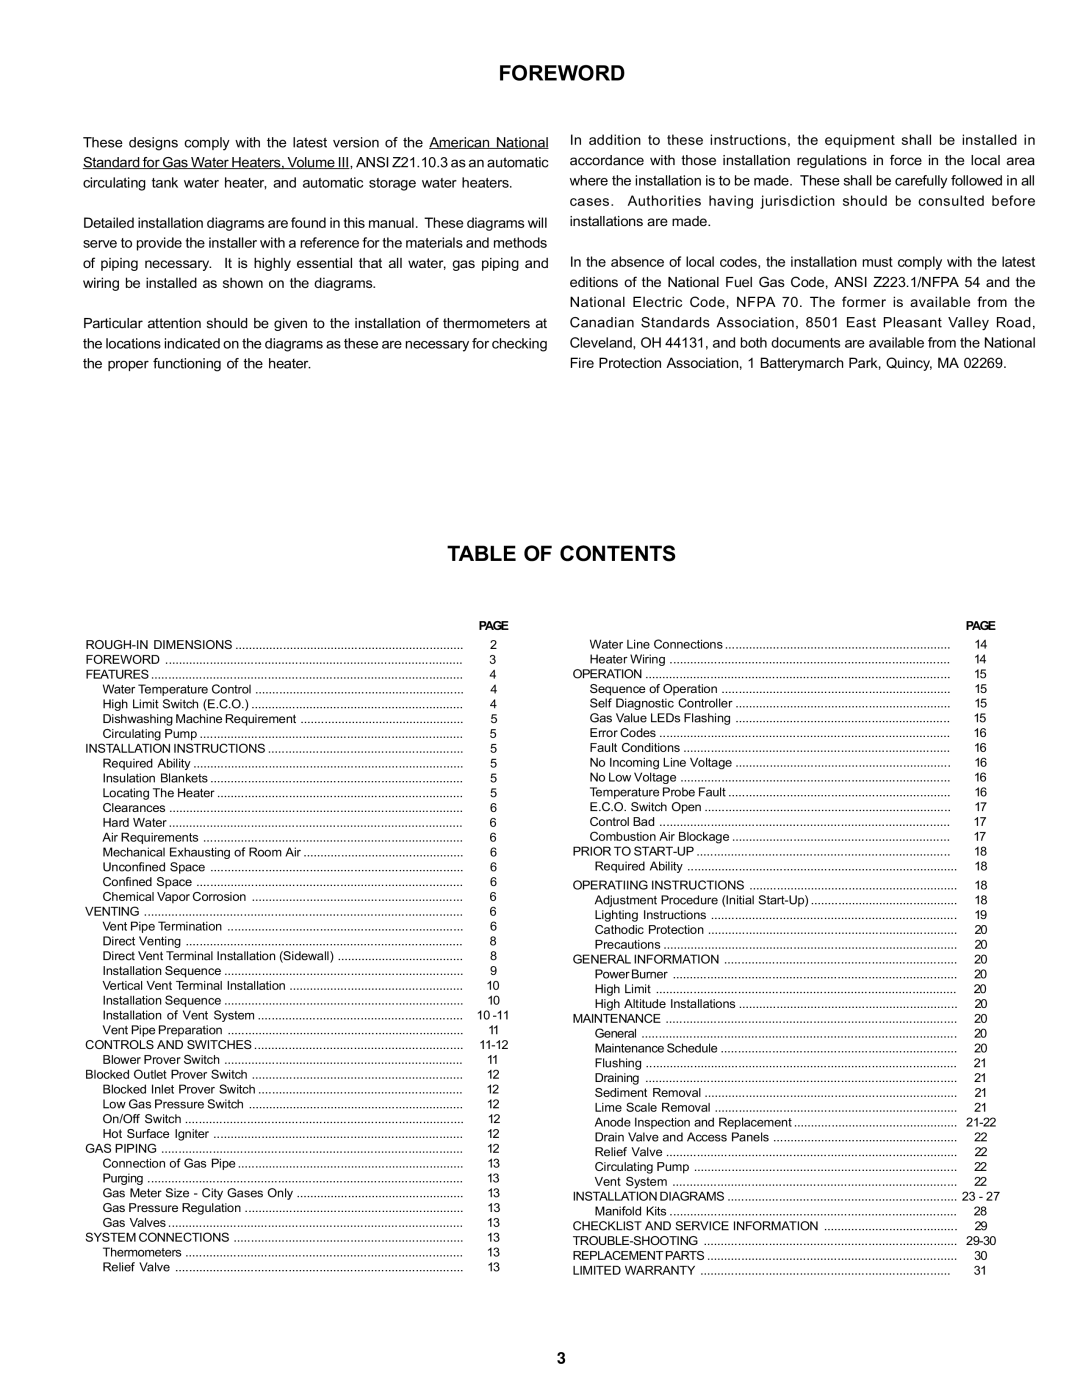 A.O. Smith BTH 120 - 250 warranty Foreword, Table of Contents 